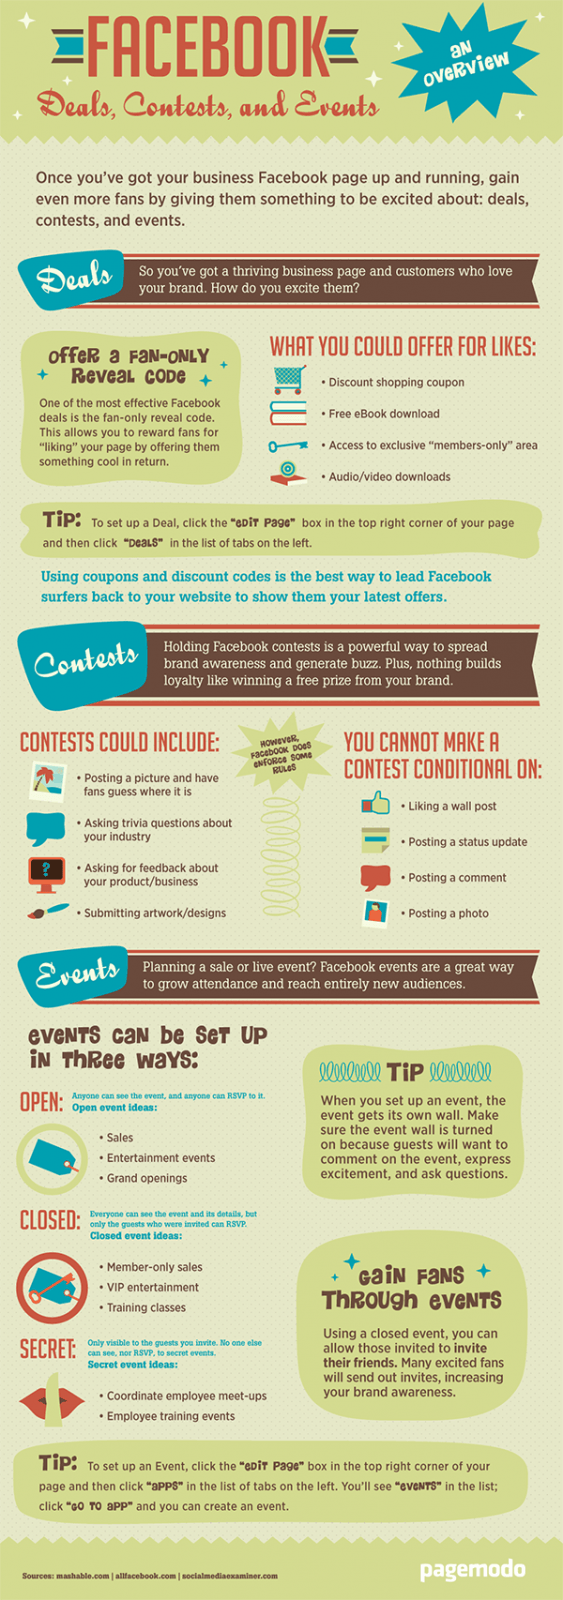 Facebook: Deals, Contests and Events [Infographic]